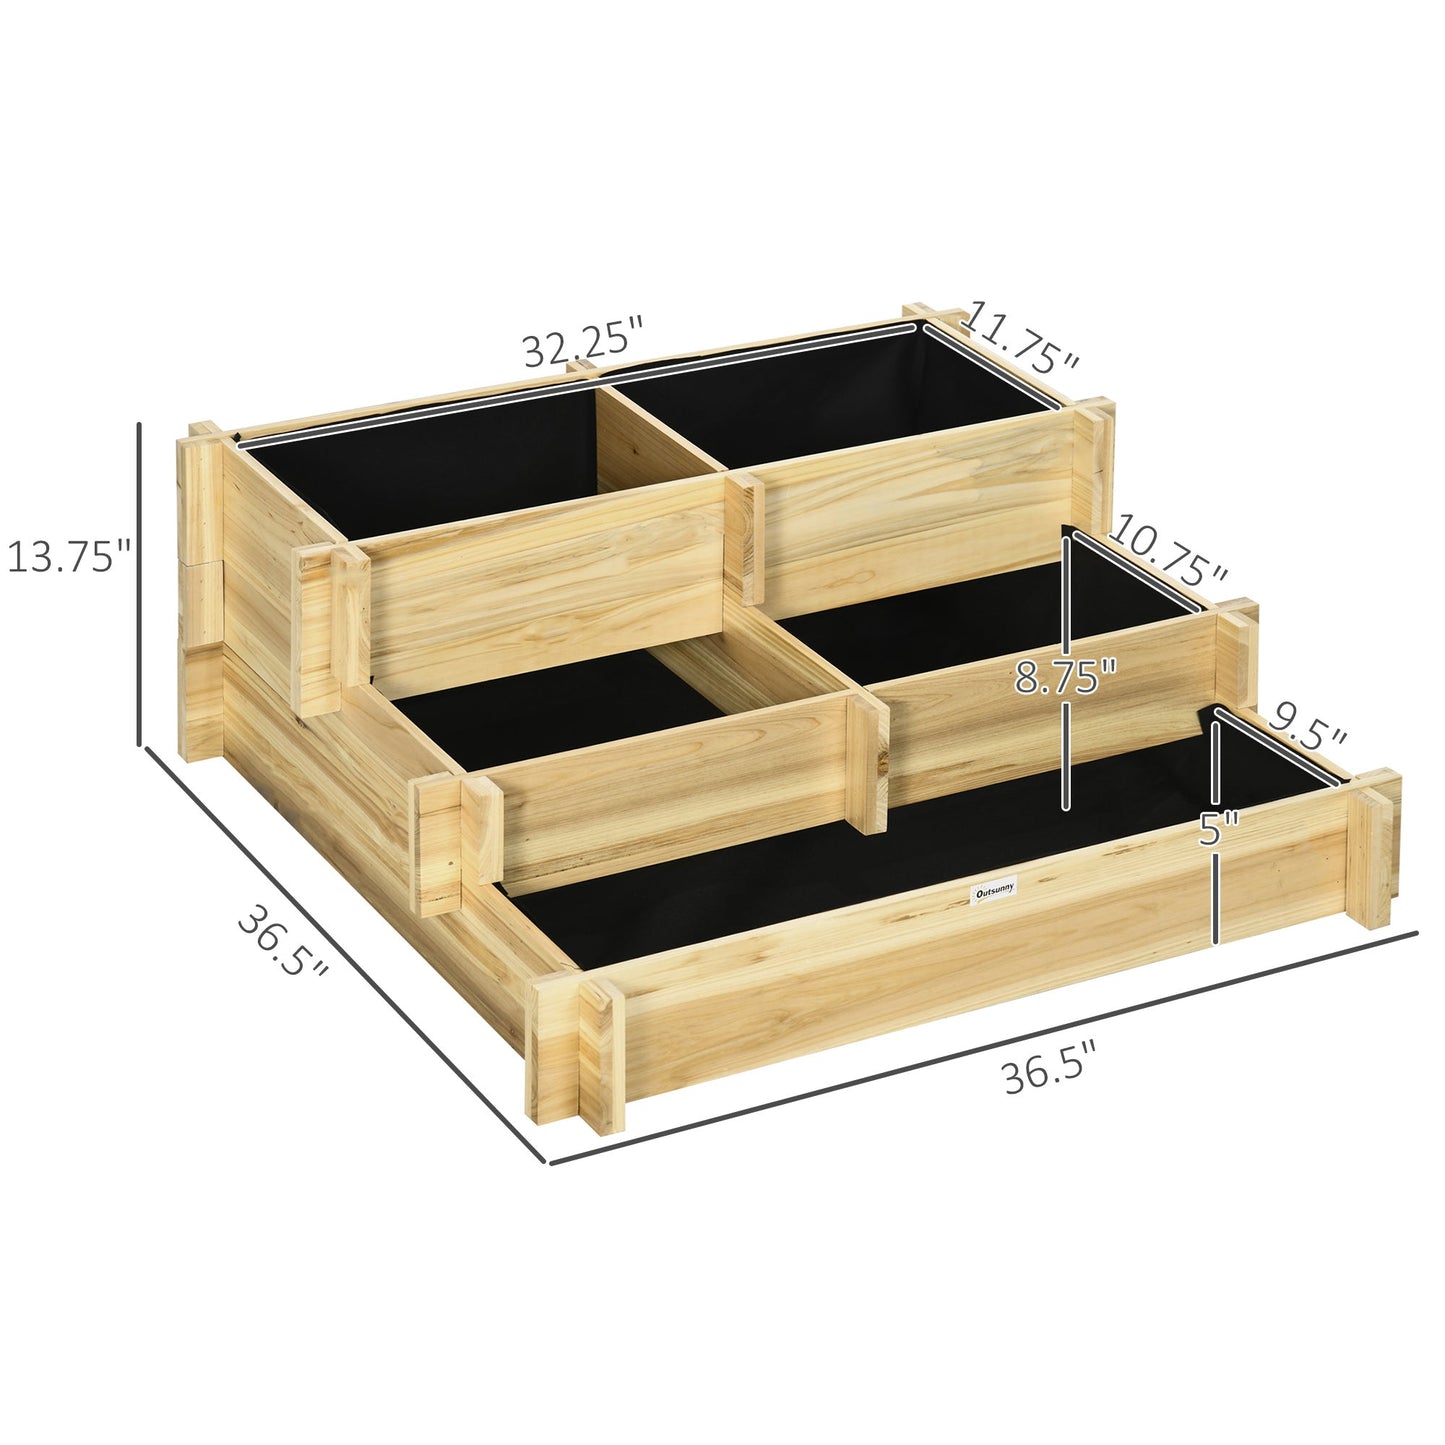 Outdoor and Garden-3 Tier Raised Garden Bed, Water Draining Fabric for Soil, Elevated Wood Flower Box for Vegetables, Herbs, Natural - Outdoor Style Company